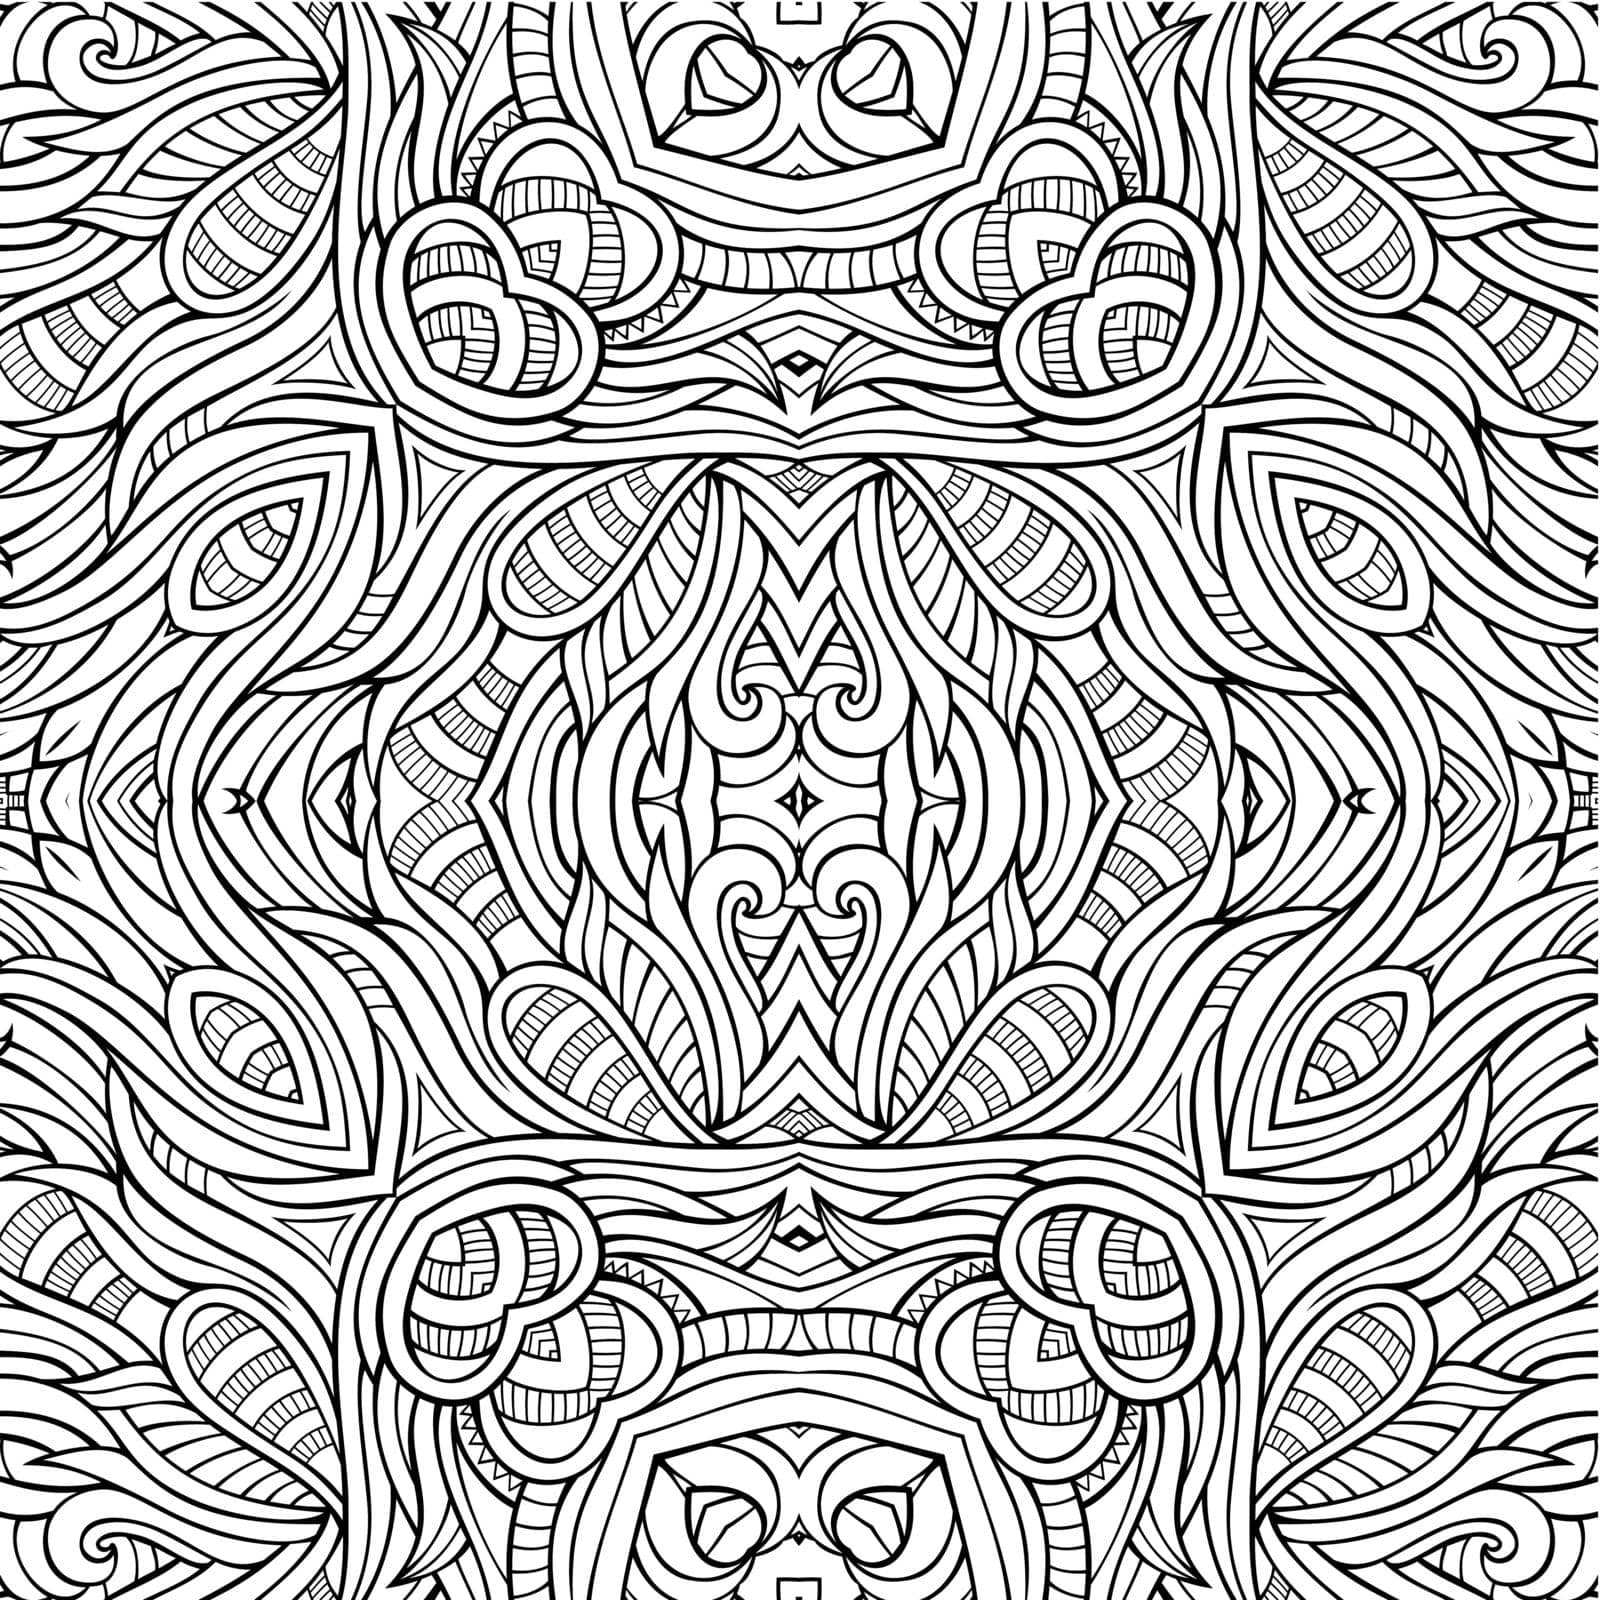 Abstract vector decorative nature ethnic hand drawn sketchy contour seamless pattern